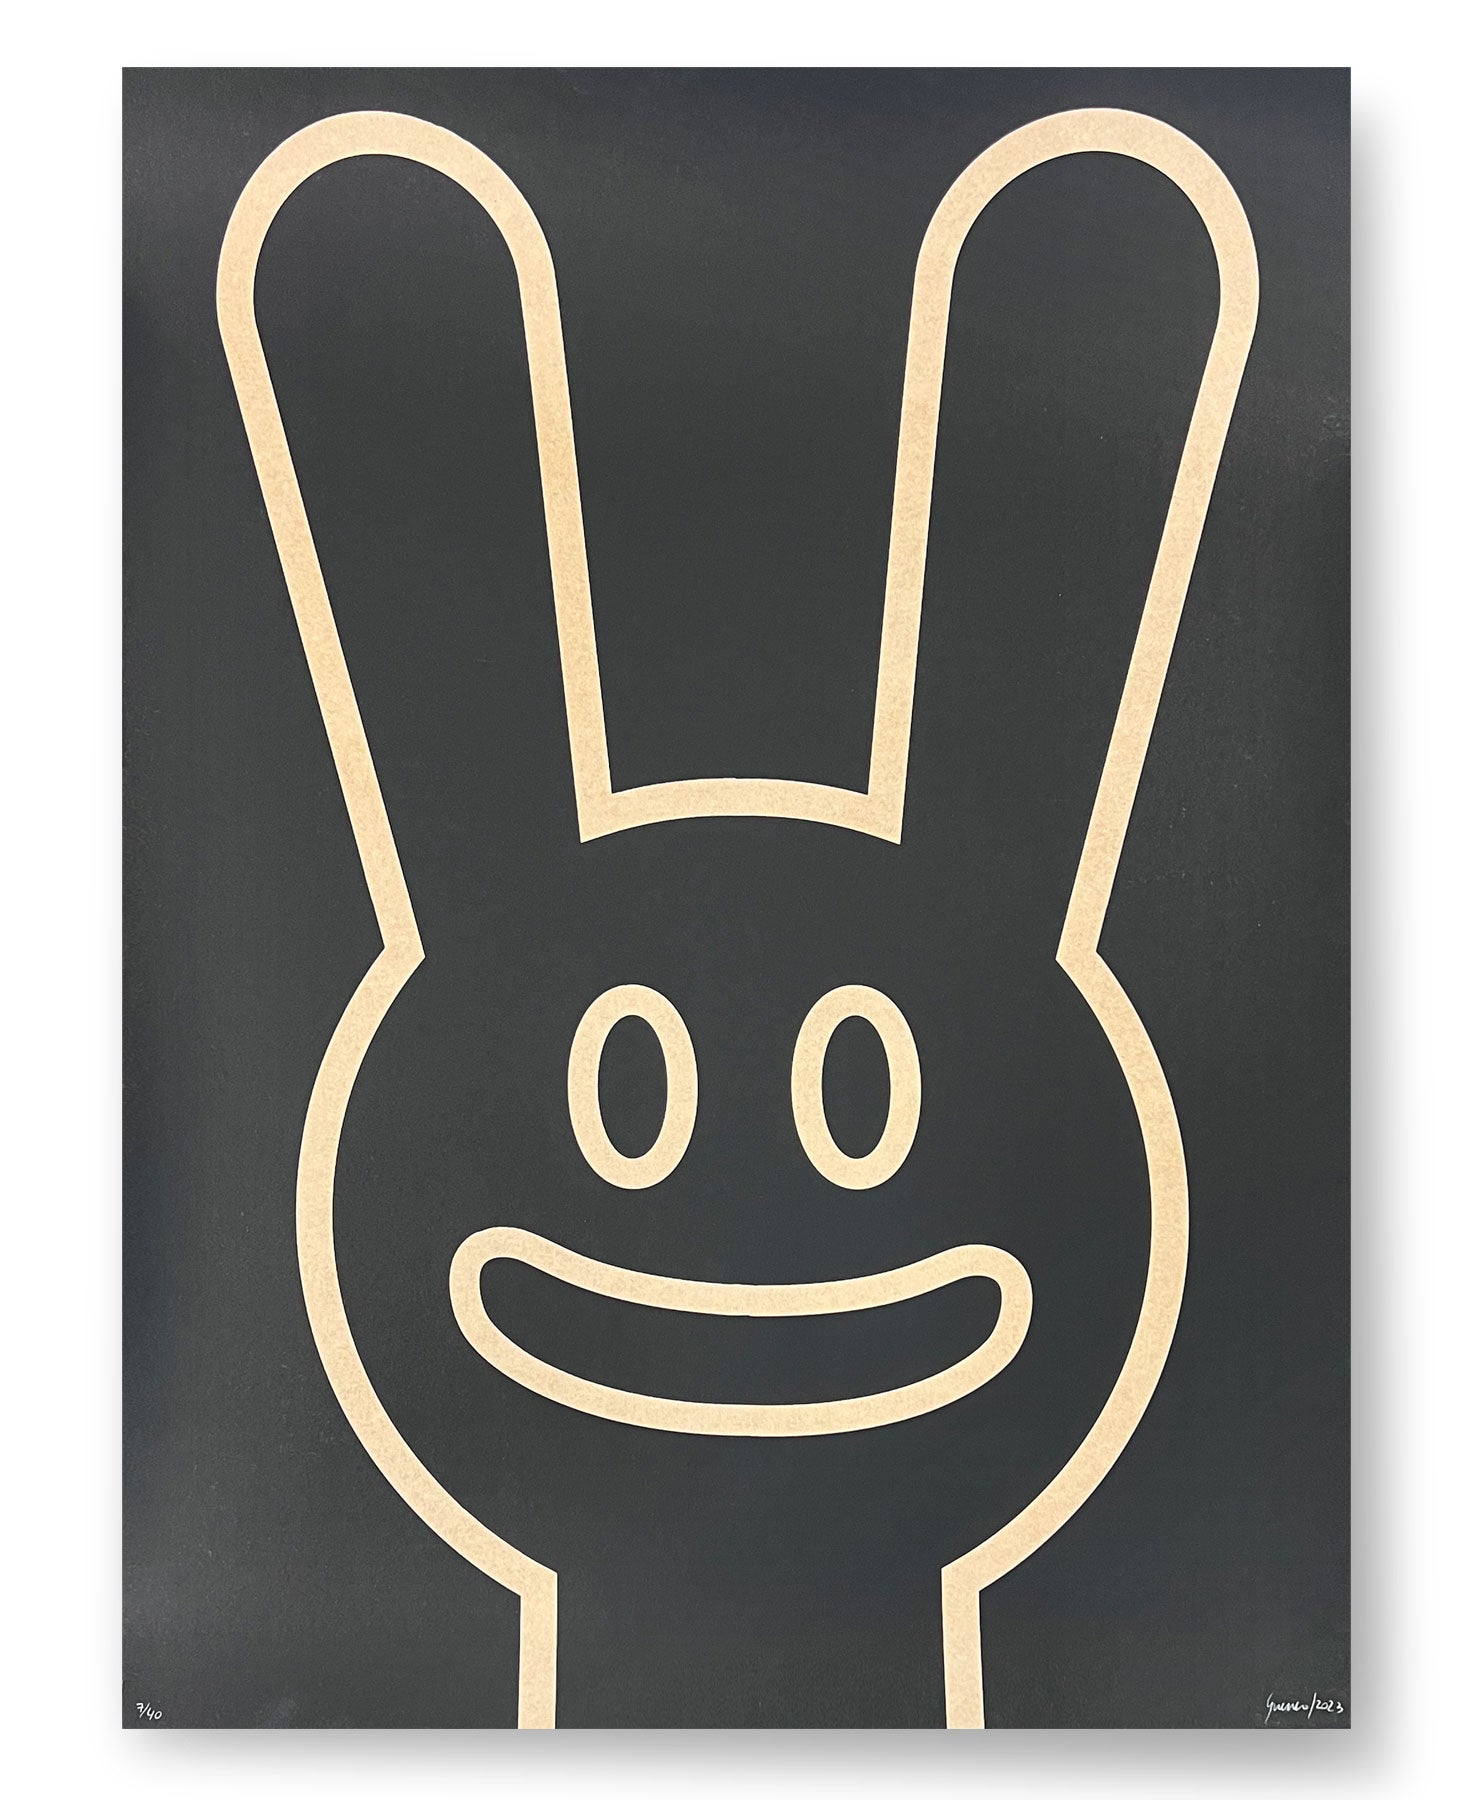 Black Bunny by Nancy Guerrero available from Heath Kane Gallery